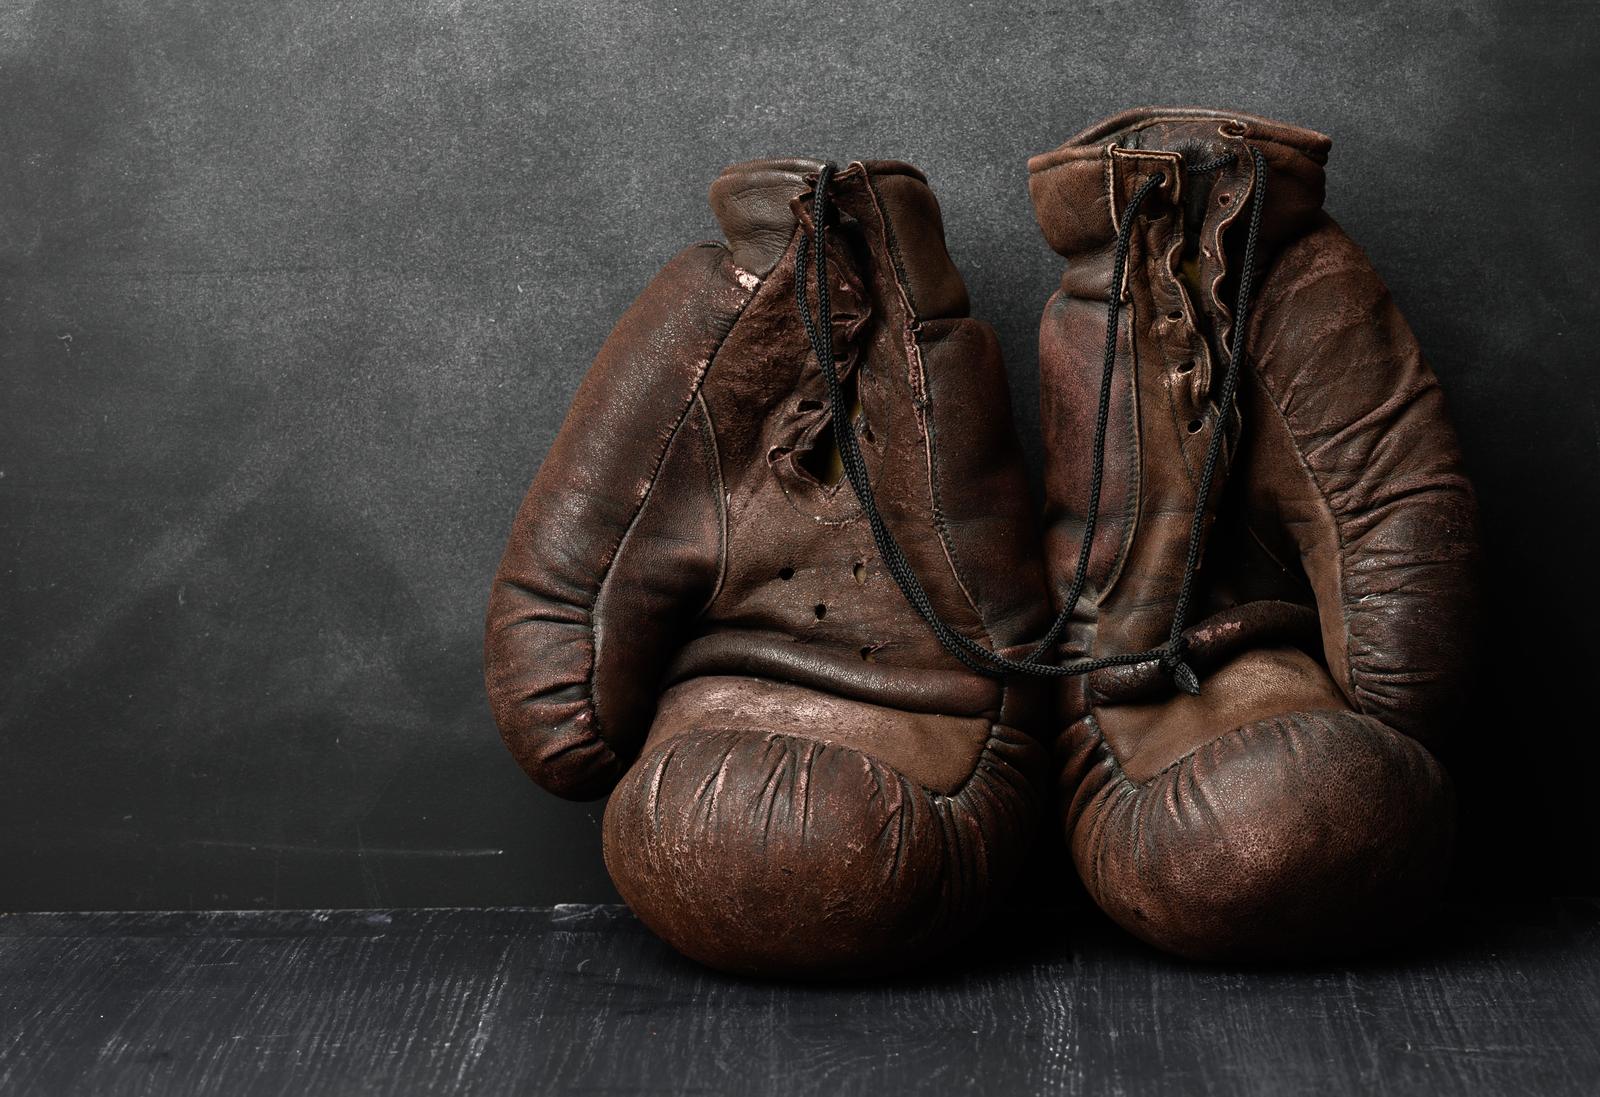 Are Boxing Gloves made of Leather?